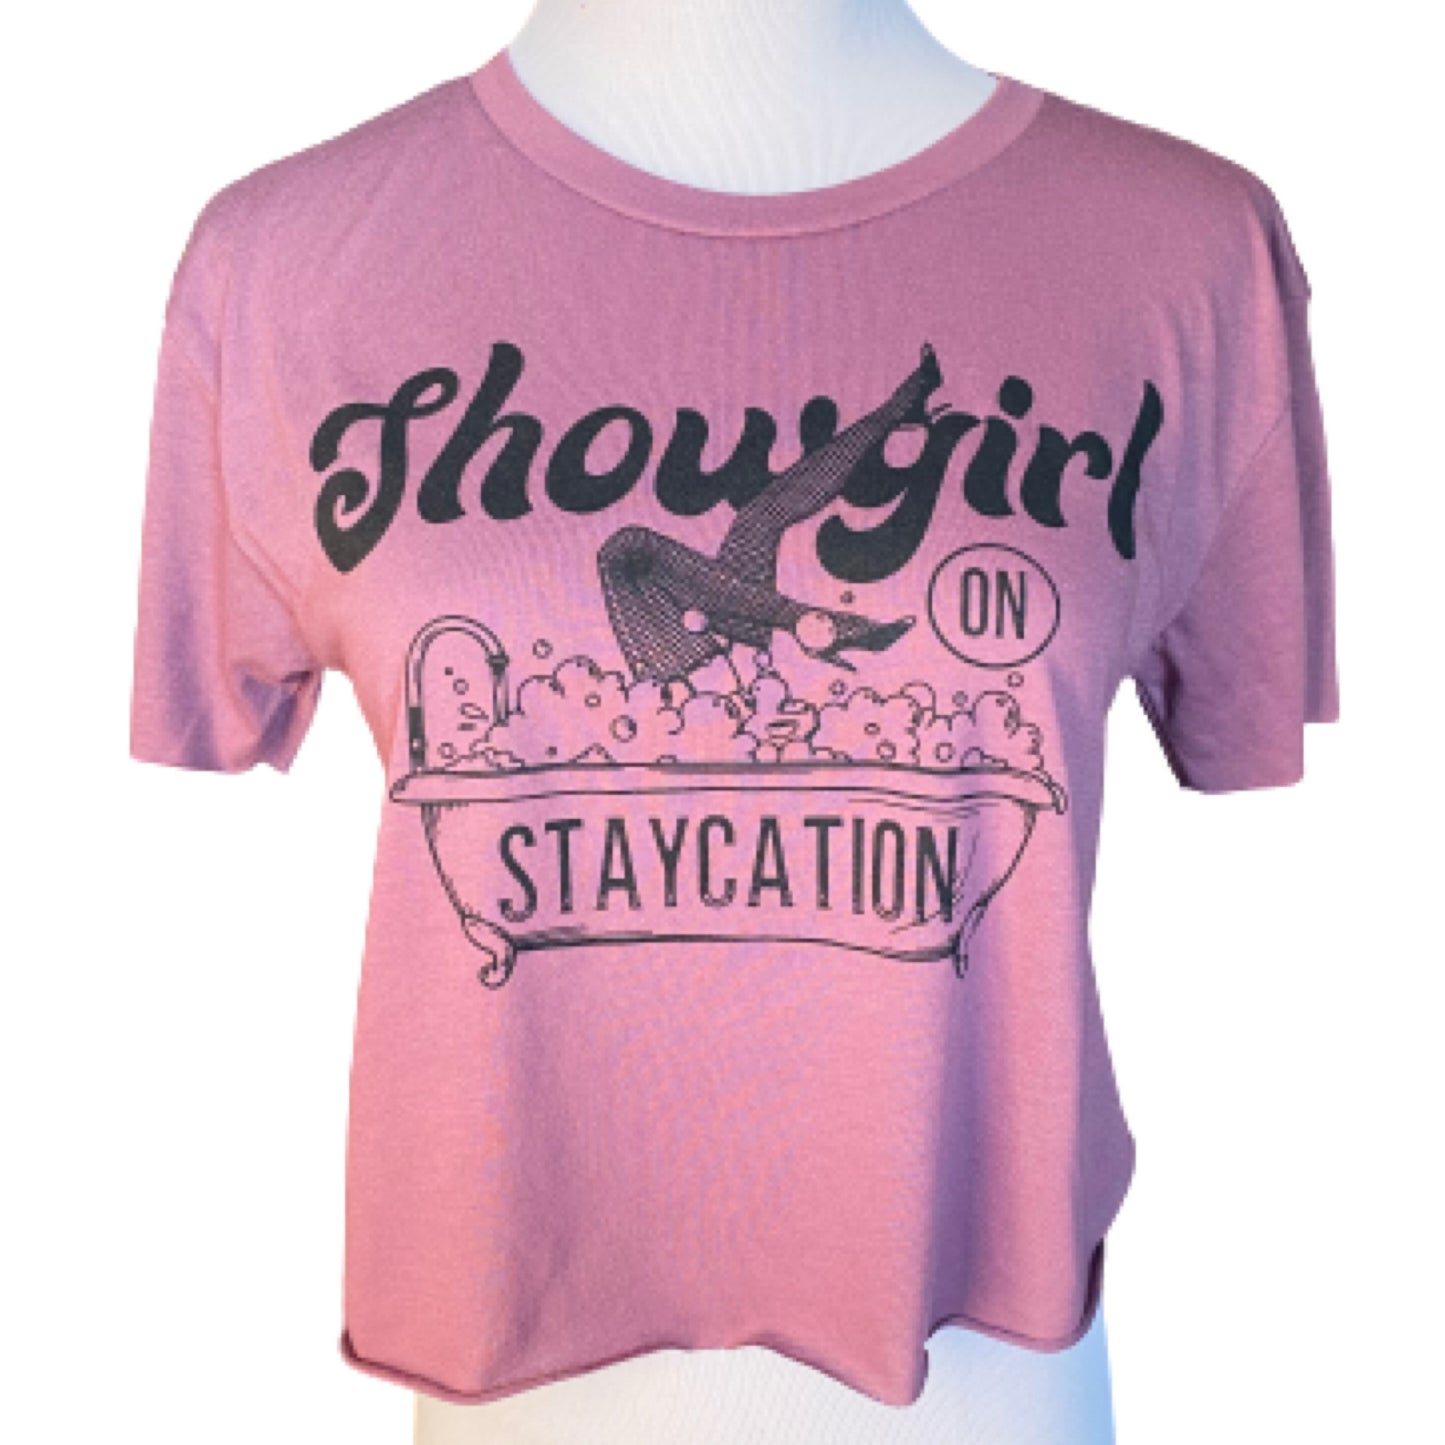 Showgirl on Staycation - Cropped Tees